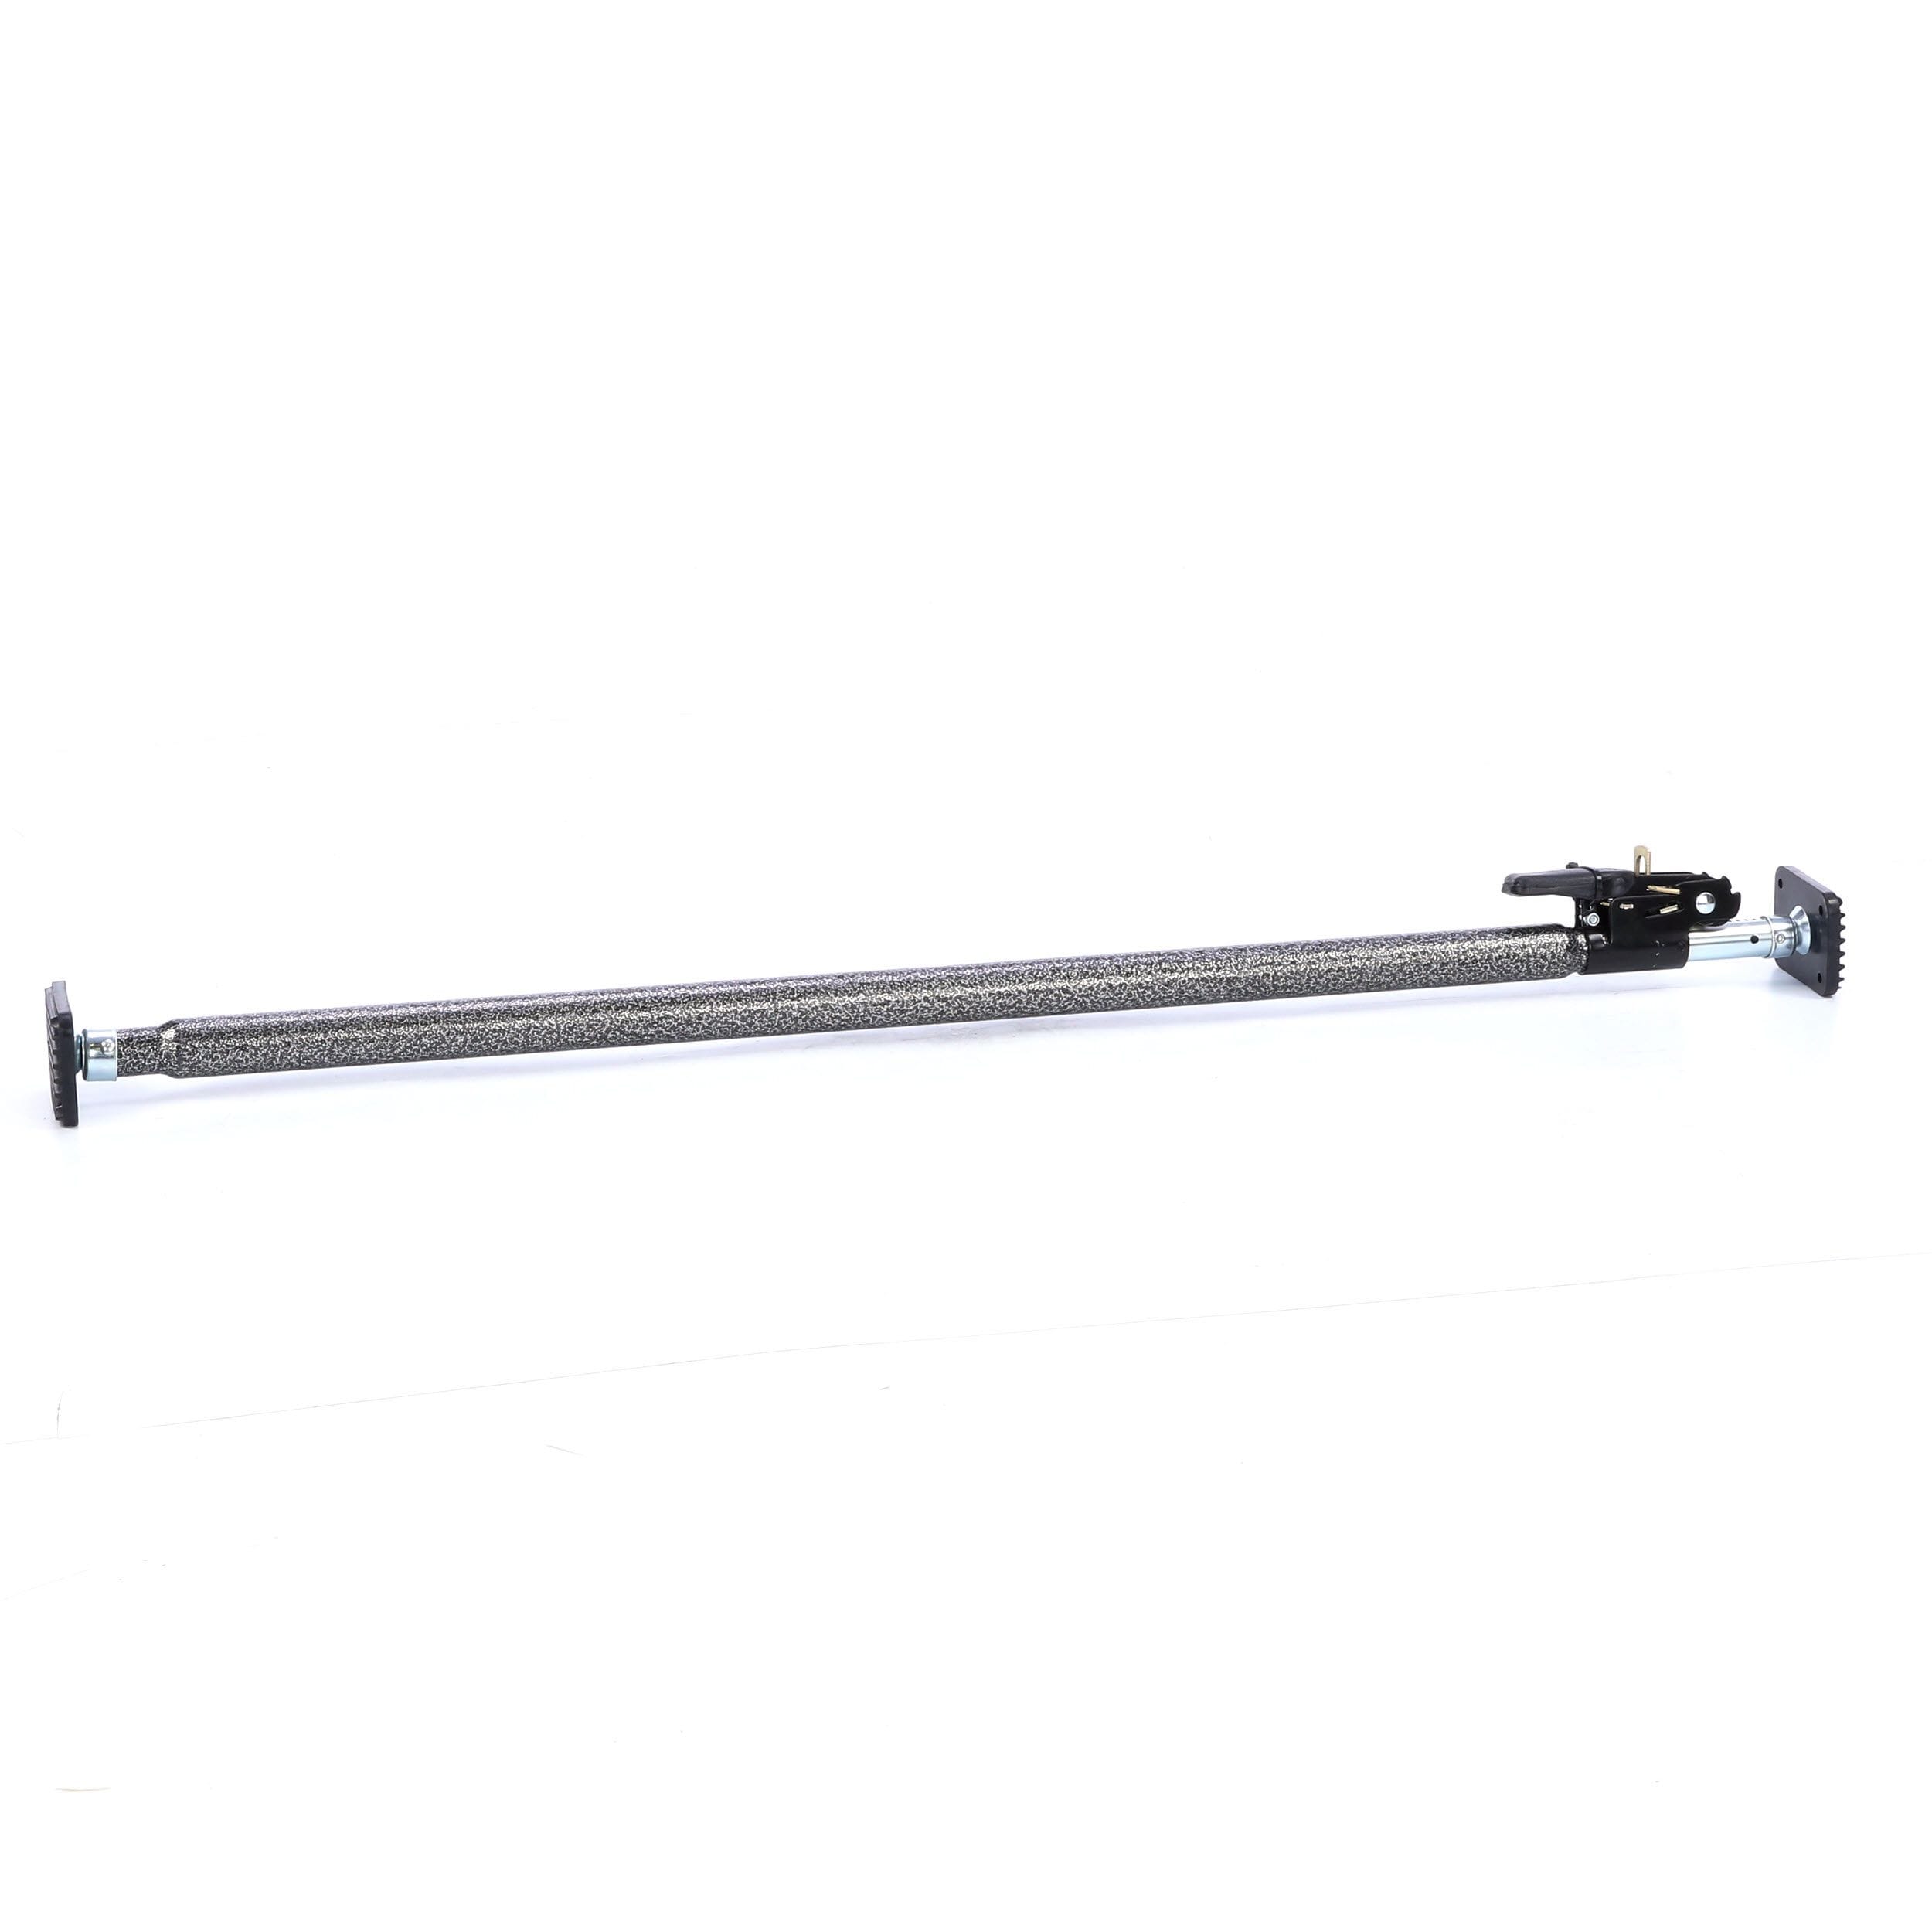 Industro 40 in Ratcheting Cargo Bar to 70 in 